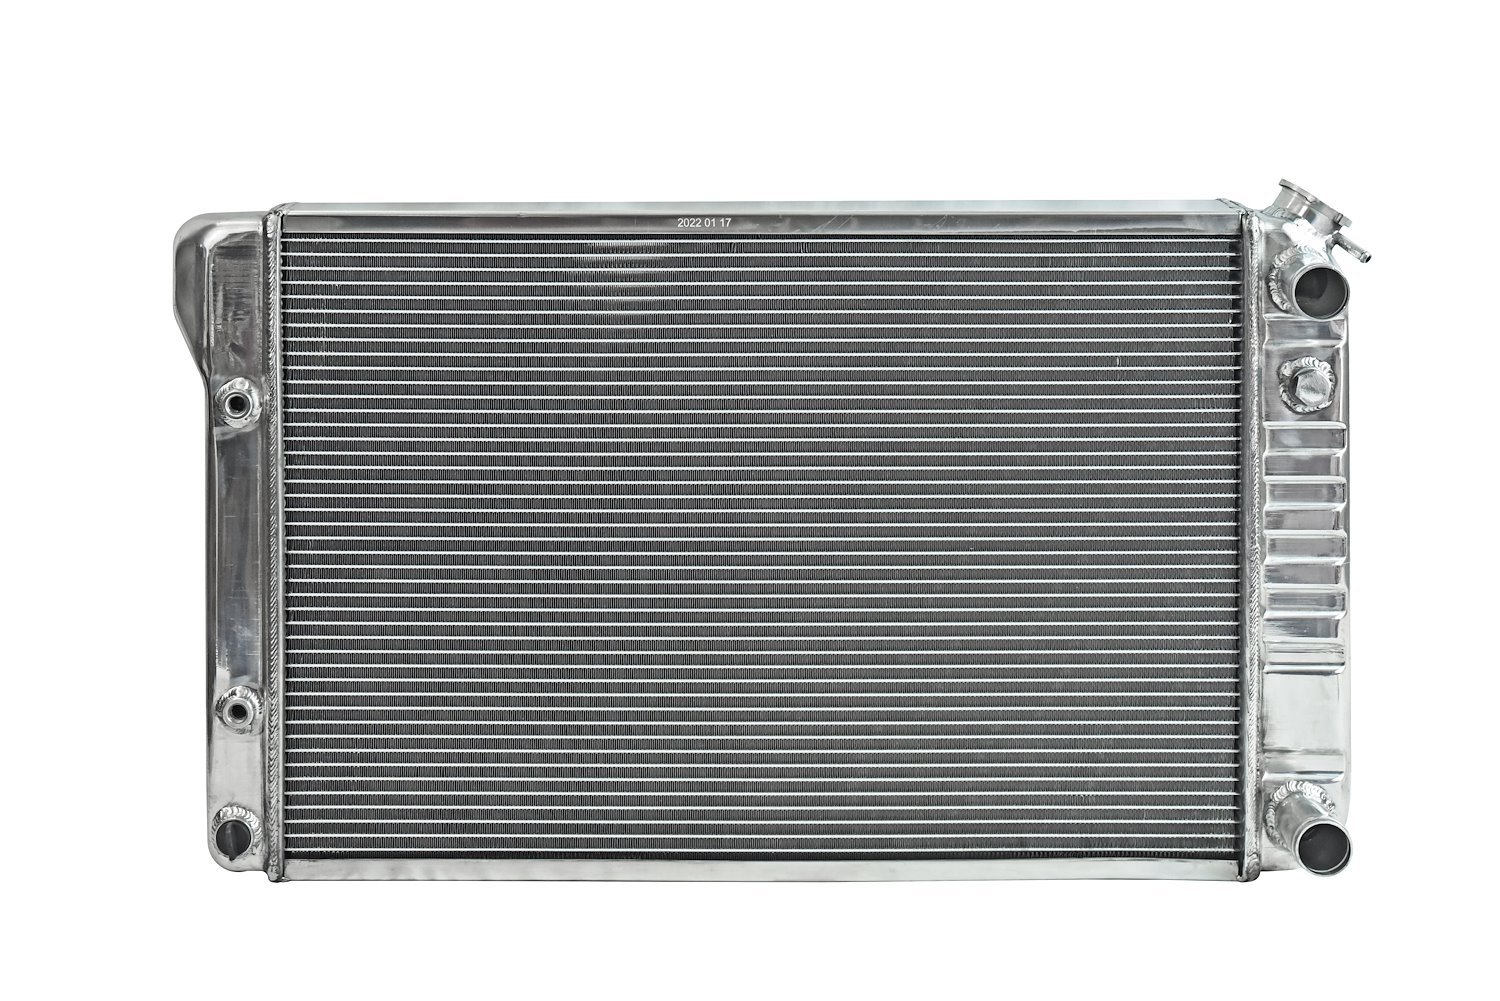 Aluminum Radiator w/Double Pass Coolant Flow for Select 1973-1987 GM Model Cars w/GM LS Engine Conversion